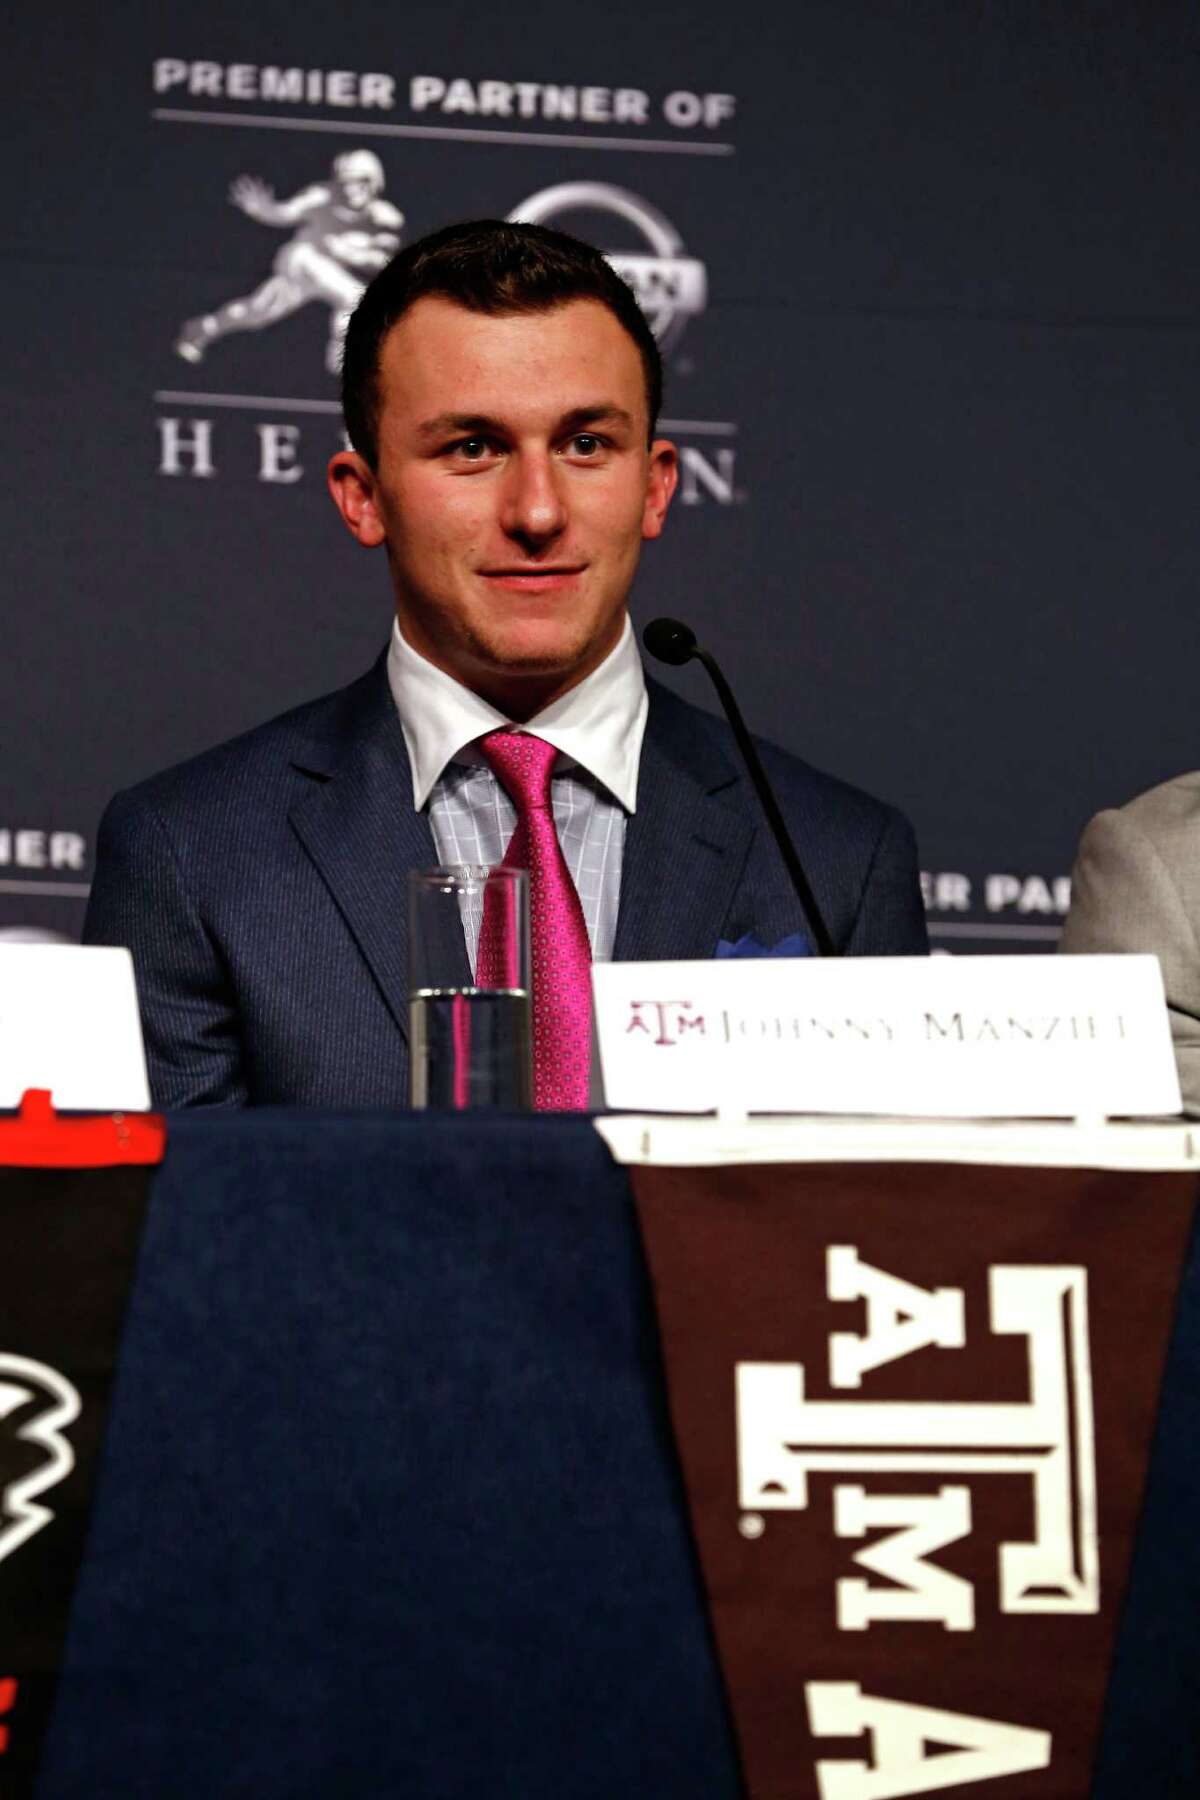 NEW YORK, NY - DECEMBER 14: Heisman Trophy finalist Johnny Manziel, quarterback of the Texas A&M Aggies, speaks to the media during a press conference prior to the 2013 Heisman Trophy Presentation at the Marriott Marquis on December 14, 2013 in New York City. (Photo by Jeff Zelevansky/Getty Images)